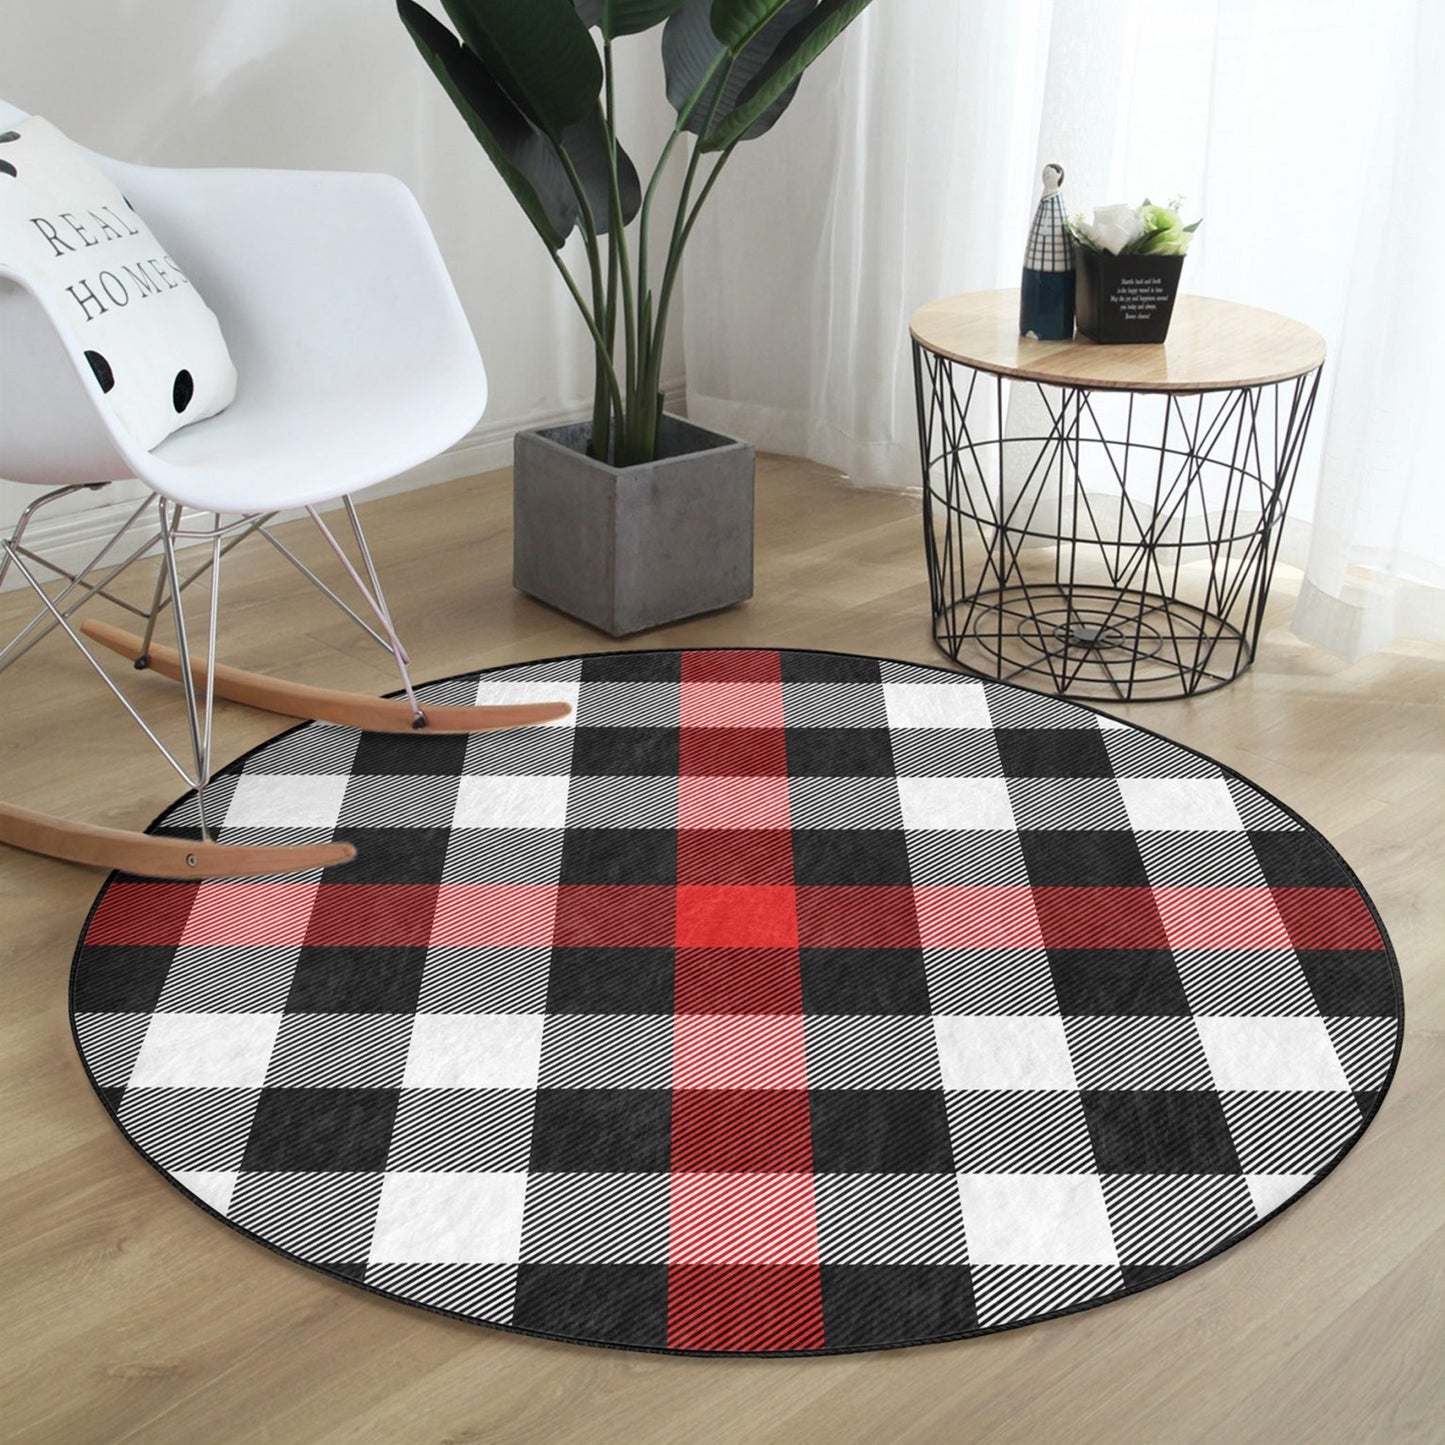 Washable Rug with Red-Grey Plaid Pattern - Easy Maintenance